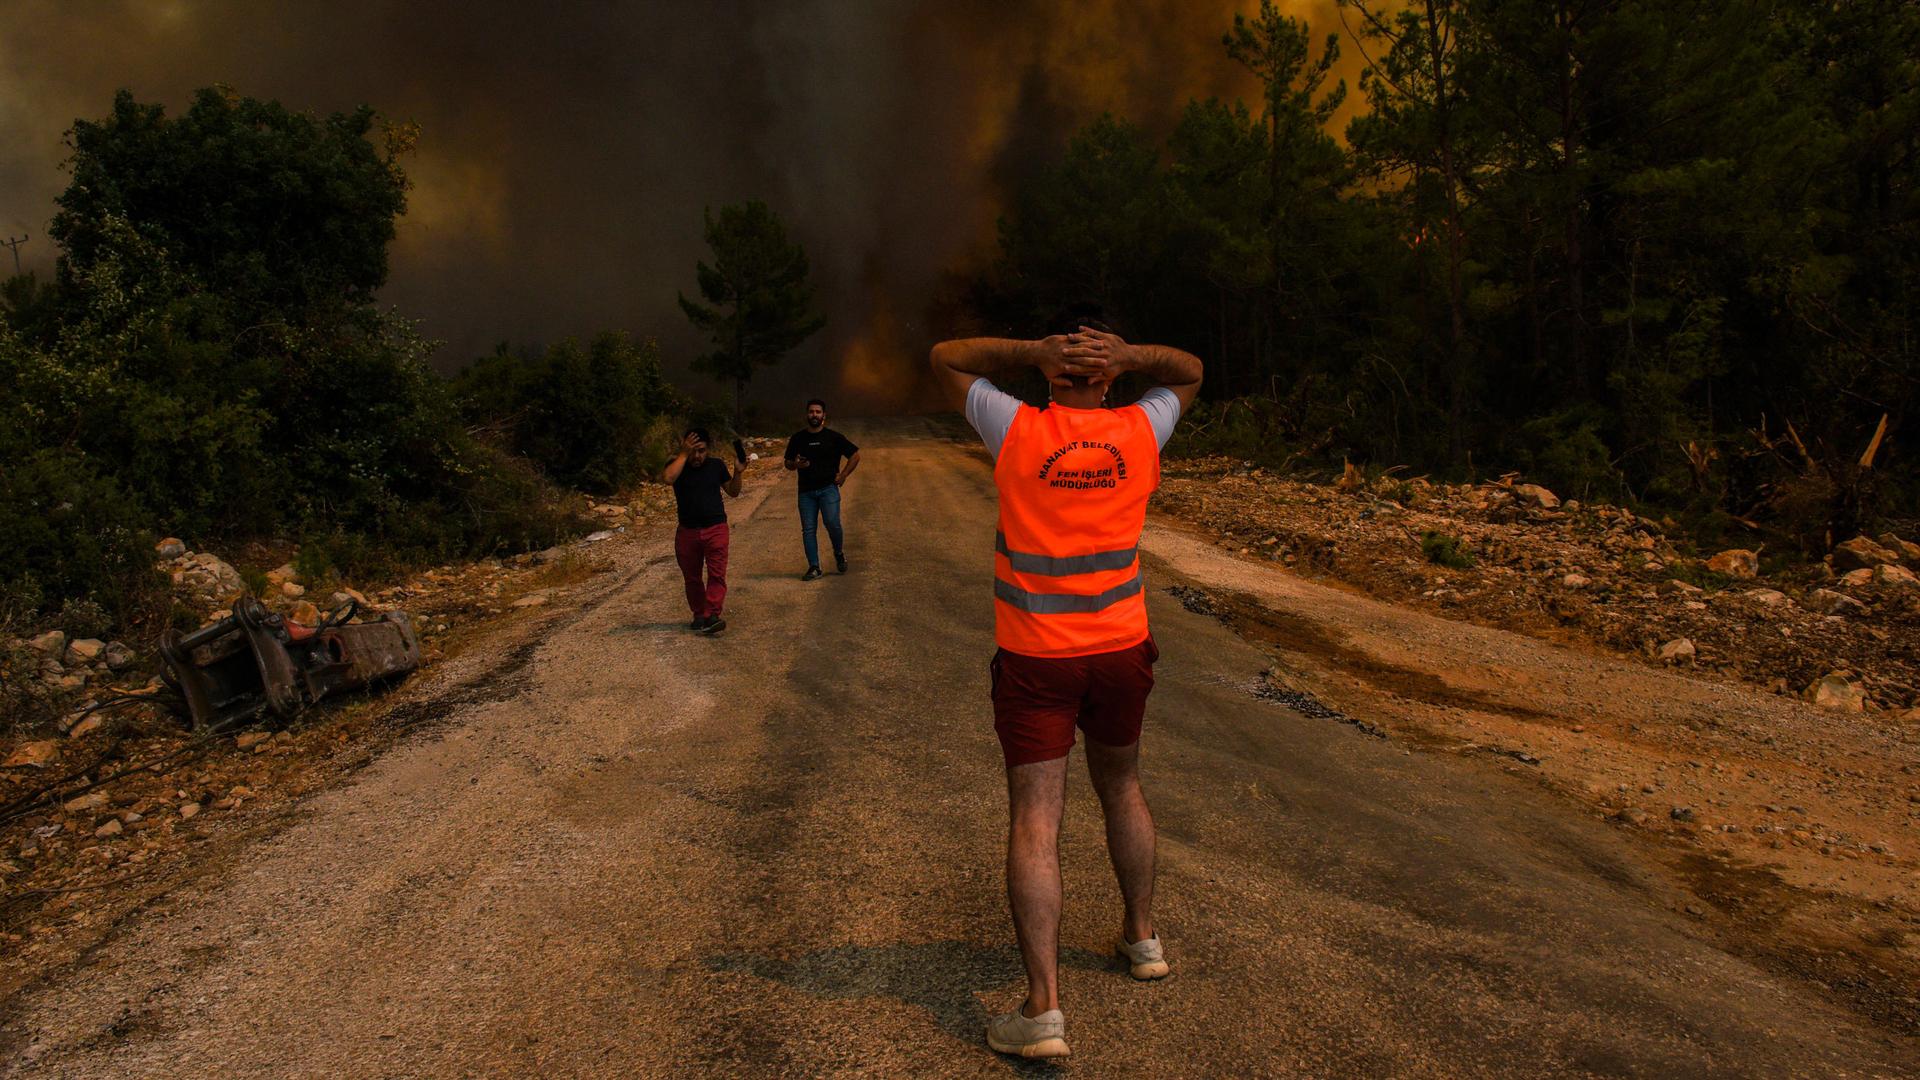 A man is shown with his back to the camera and facing a large wildfire with two other people running away from the fire.